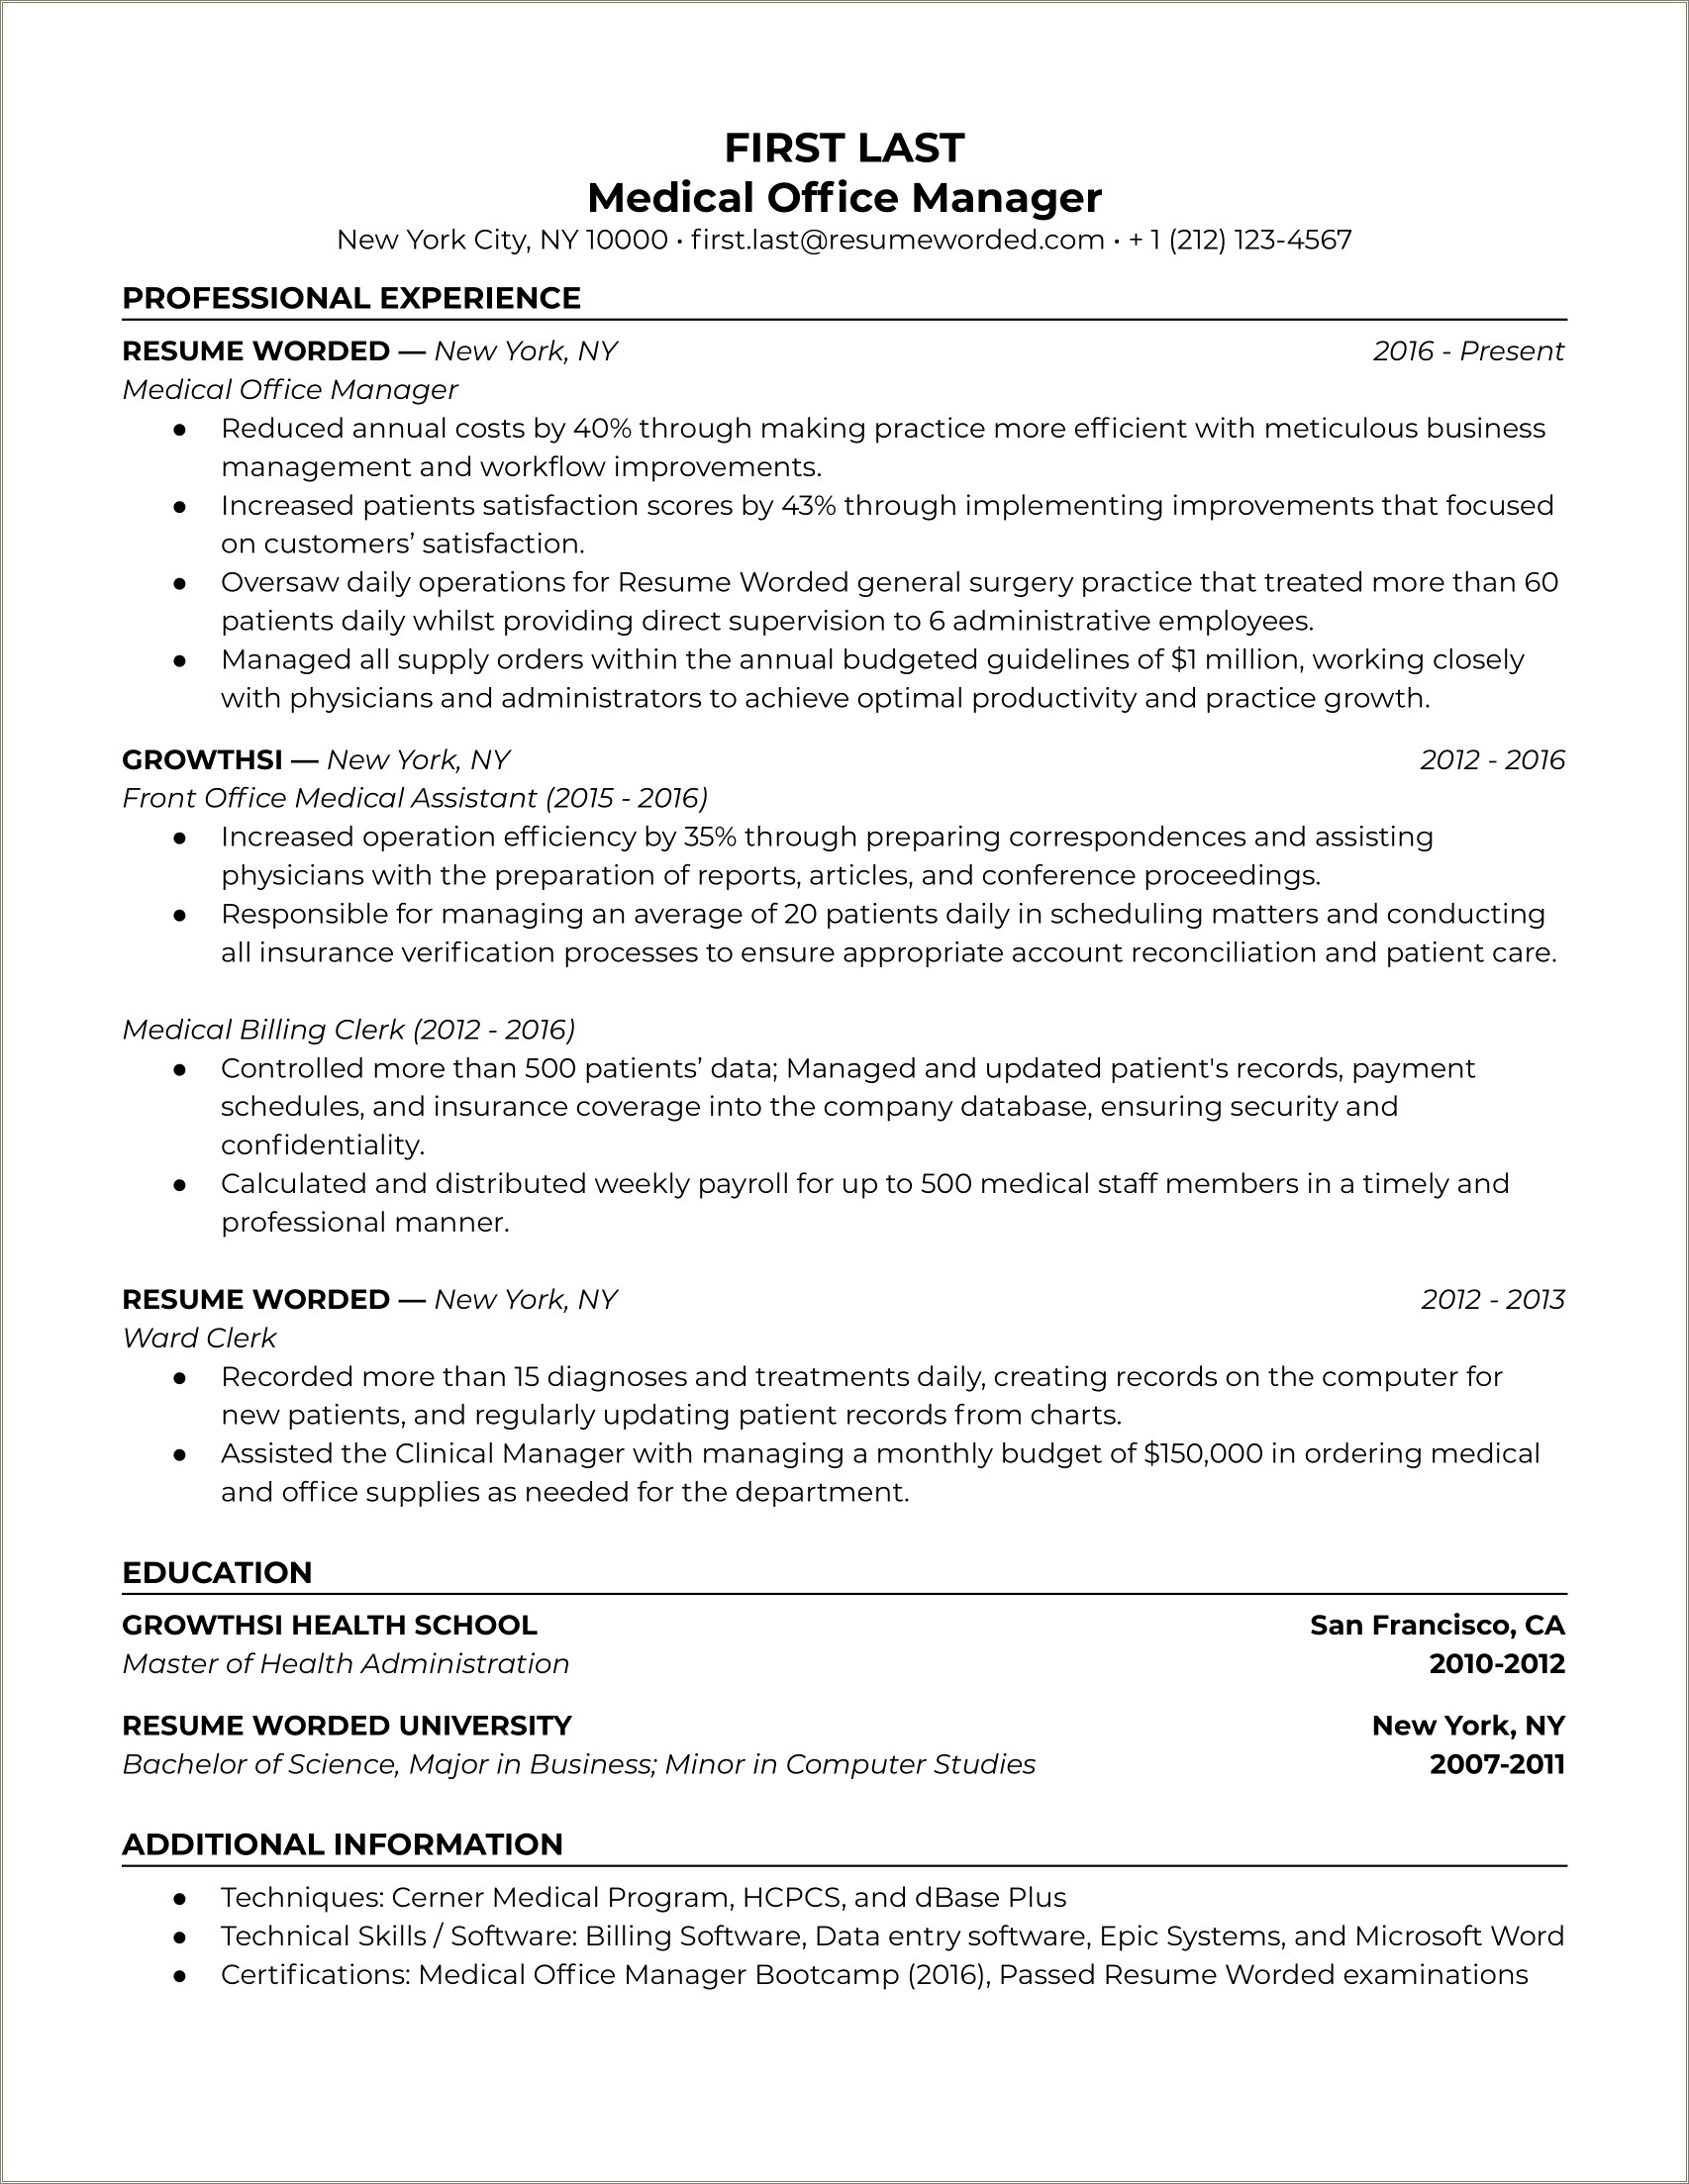 Sample Resume Objective For Medical Practice Manager